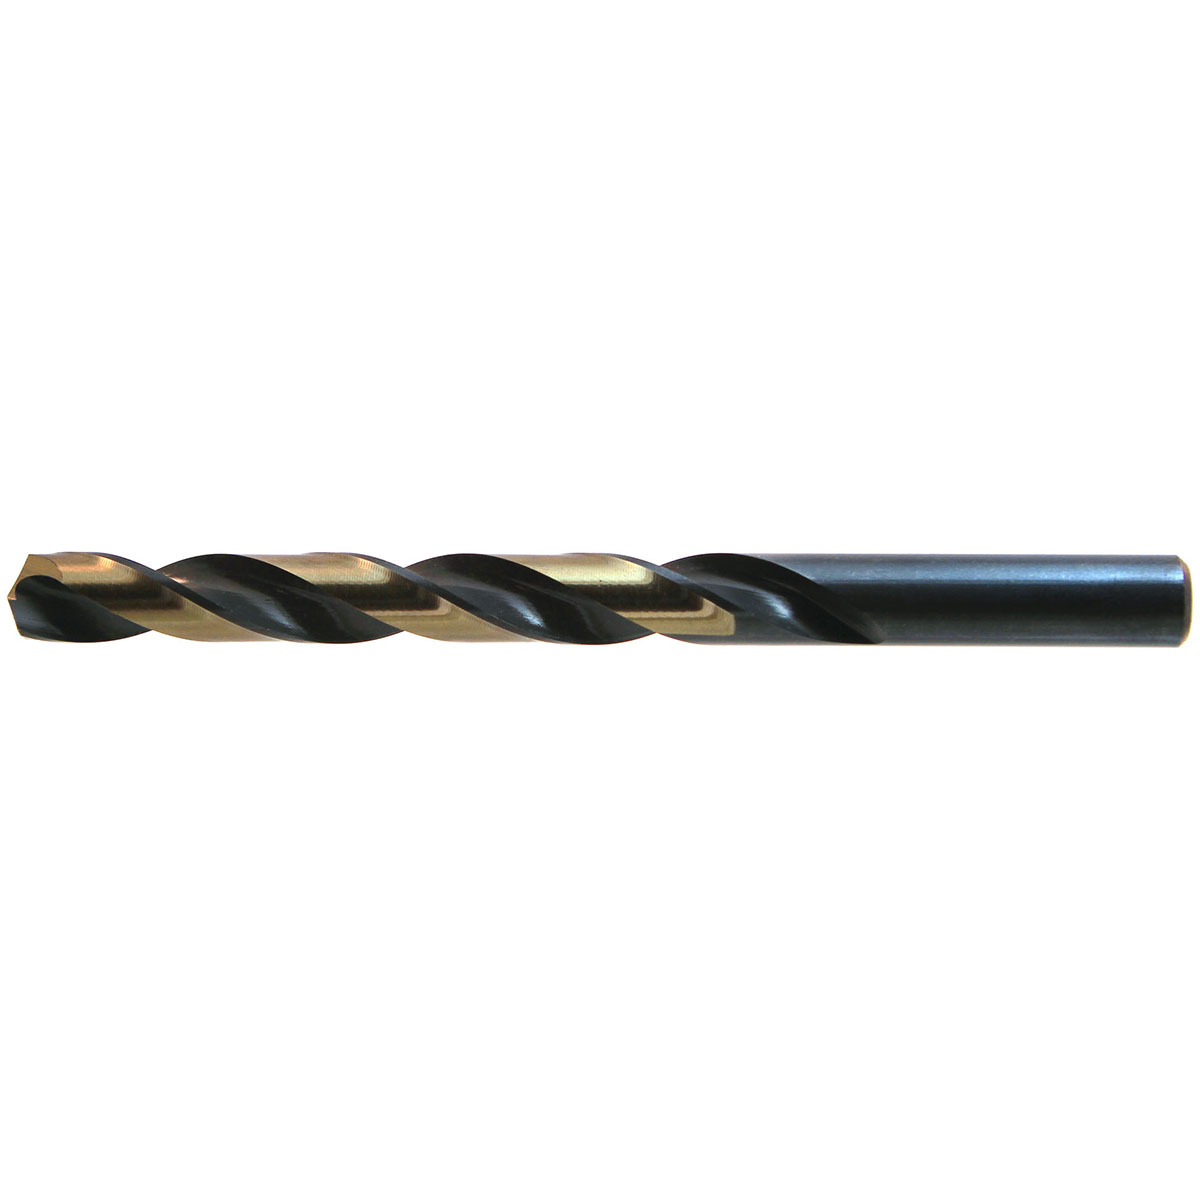 Drillco Nitro Series 400N 15//32 X 5 3//4 Black and Gold Oxide HSS General Purpose Heavy Duty Jobber Length Drill Bit with Straight Shank and 4 5//16 Spiral Flute 6 Each//Pack